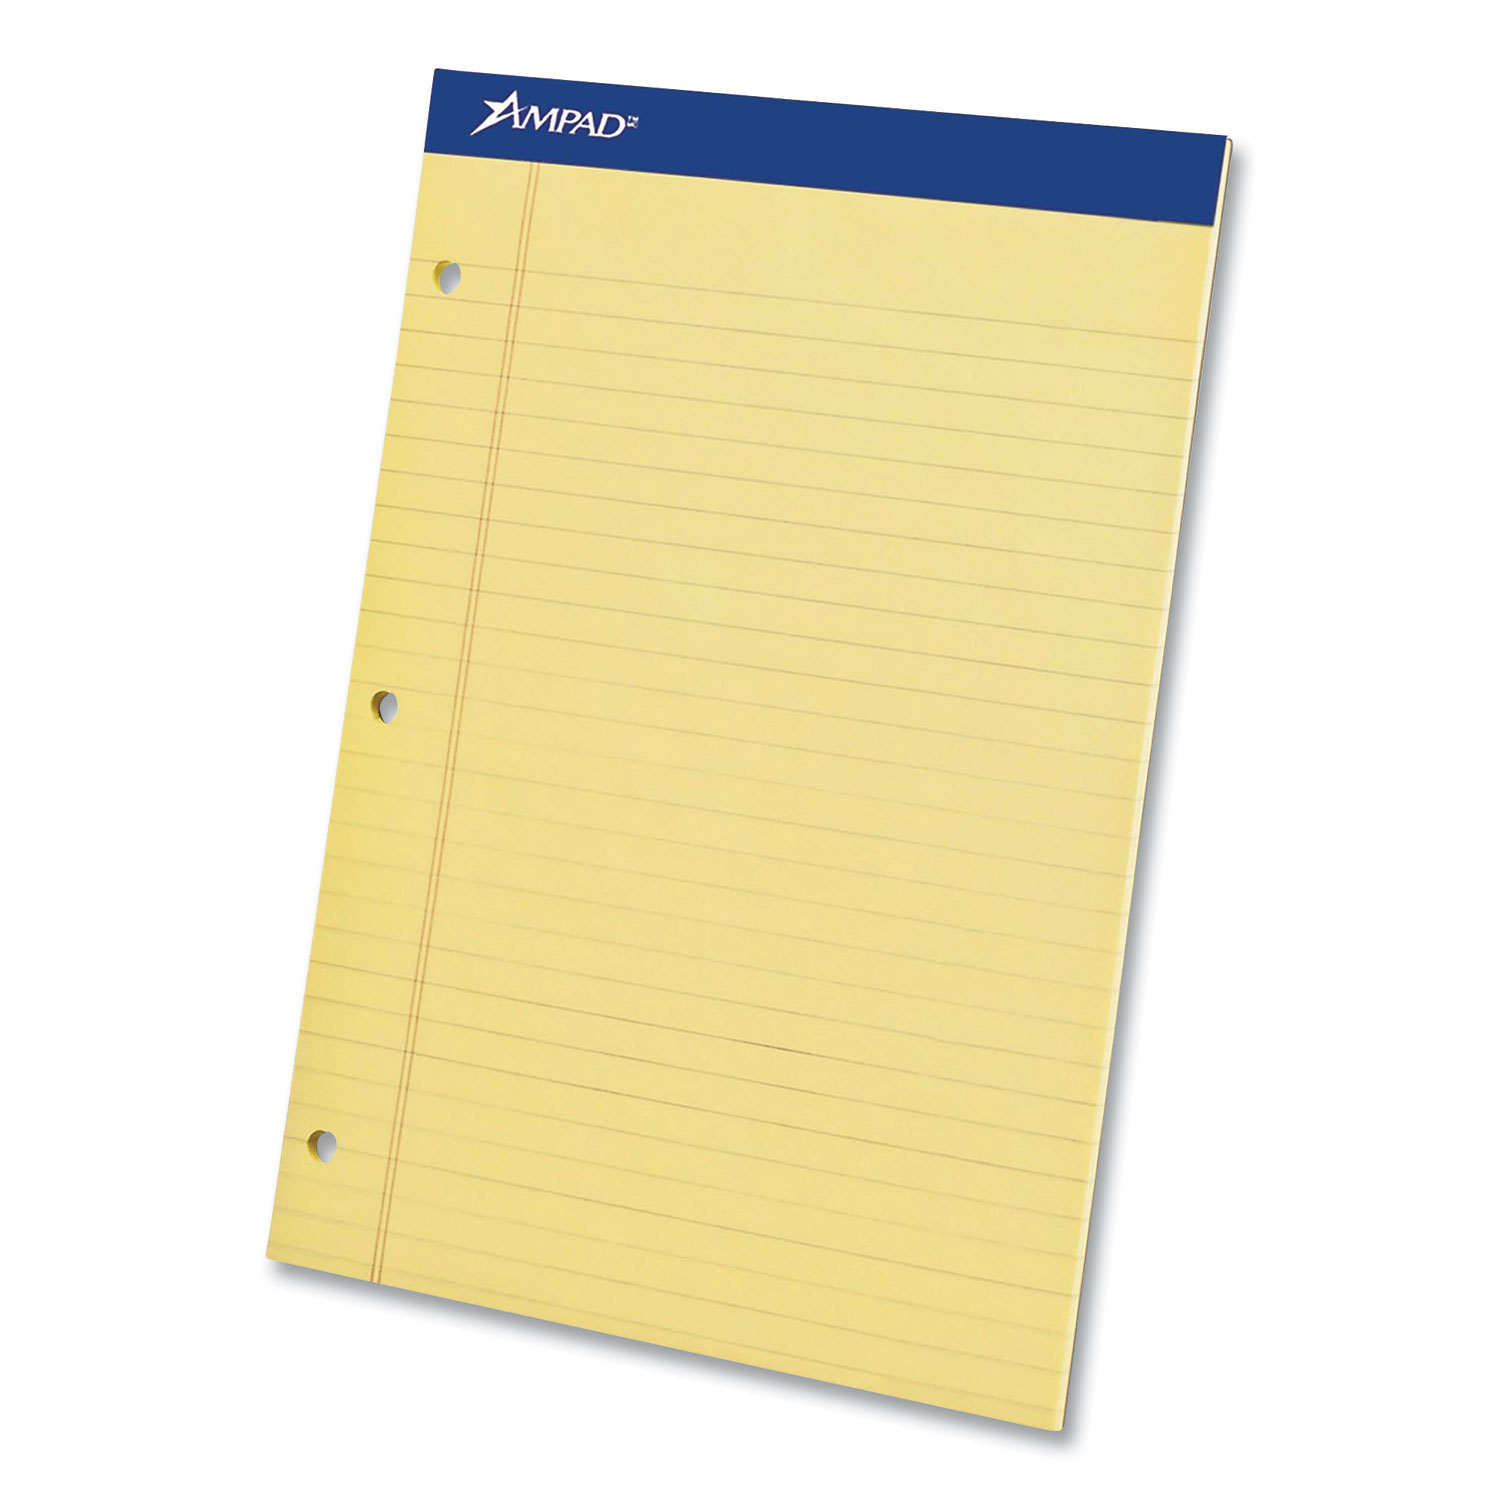 Ampad® Perforated Writing Pads, 3-Hole Side Punched, Wide/Legal Rule, 8.5 x 11.75, Canary, 50 Sheets, Dozen